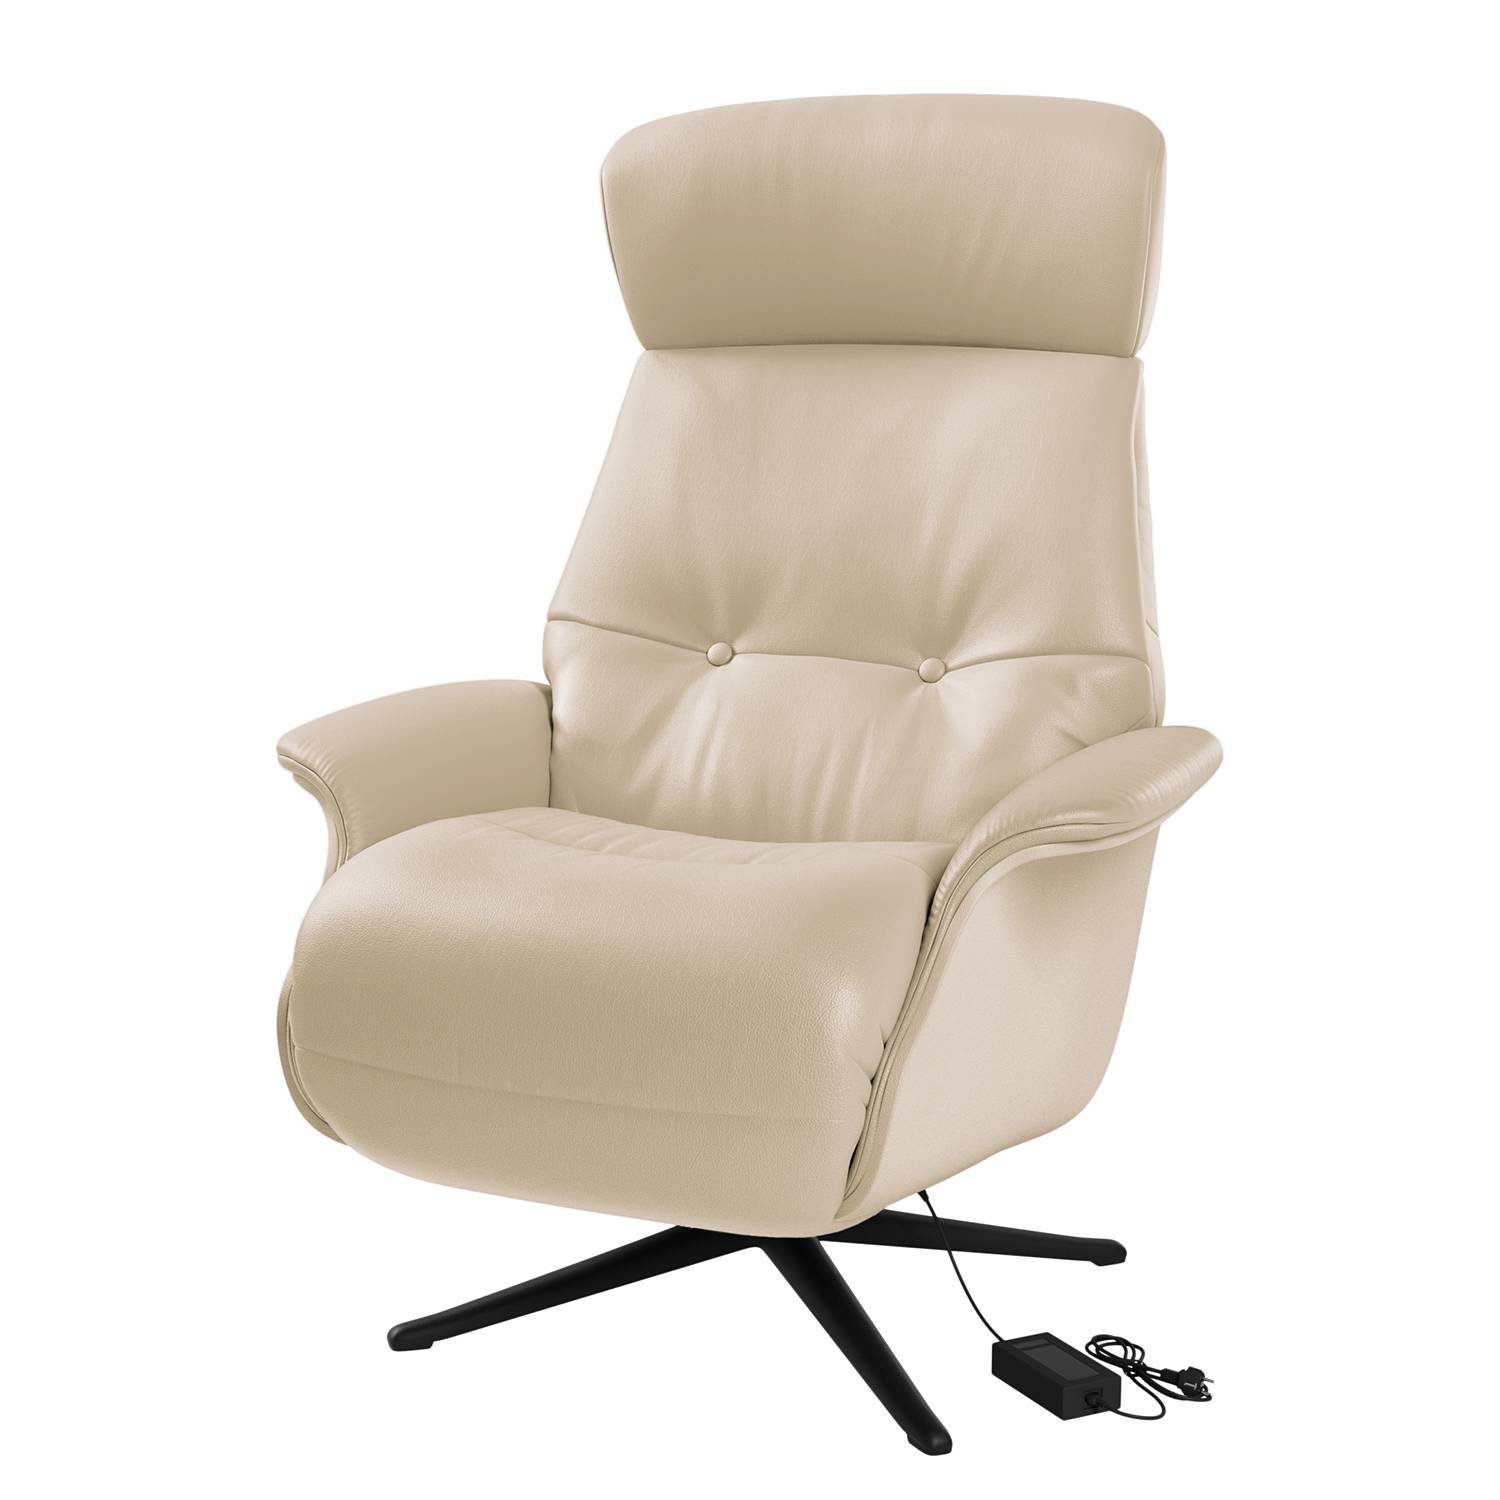 Image of Fauteuil relax Anderson VI 000000001000131476